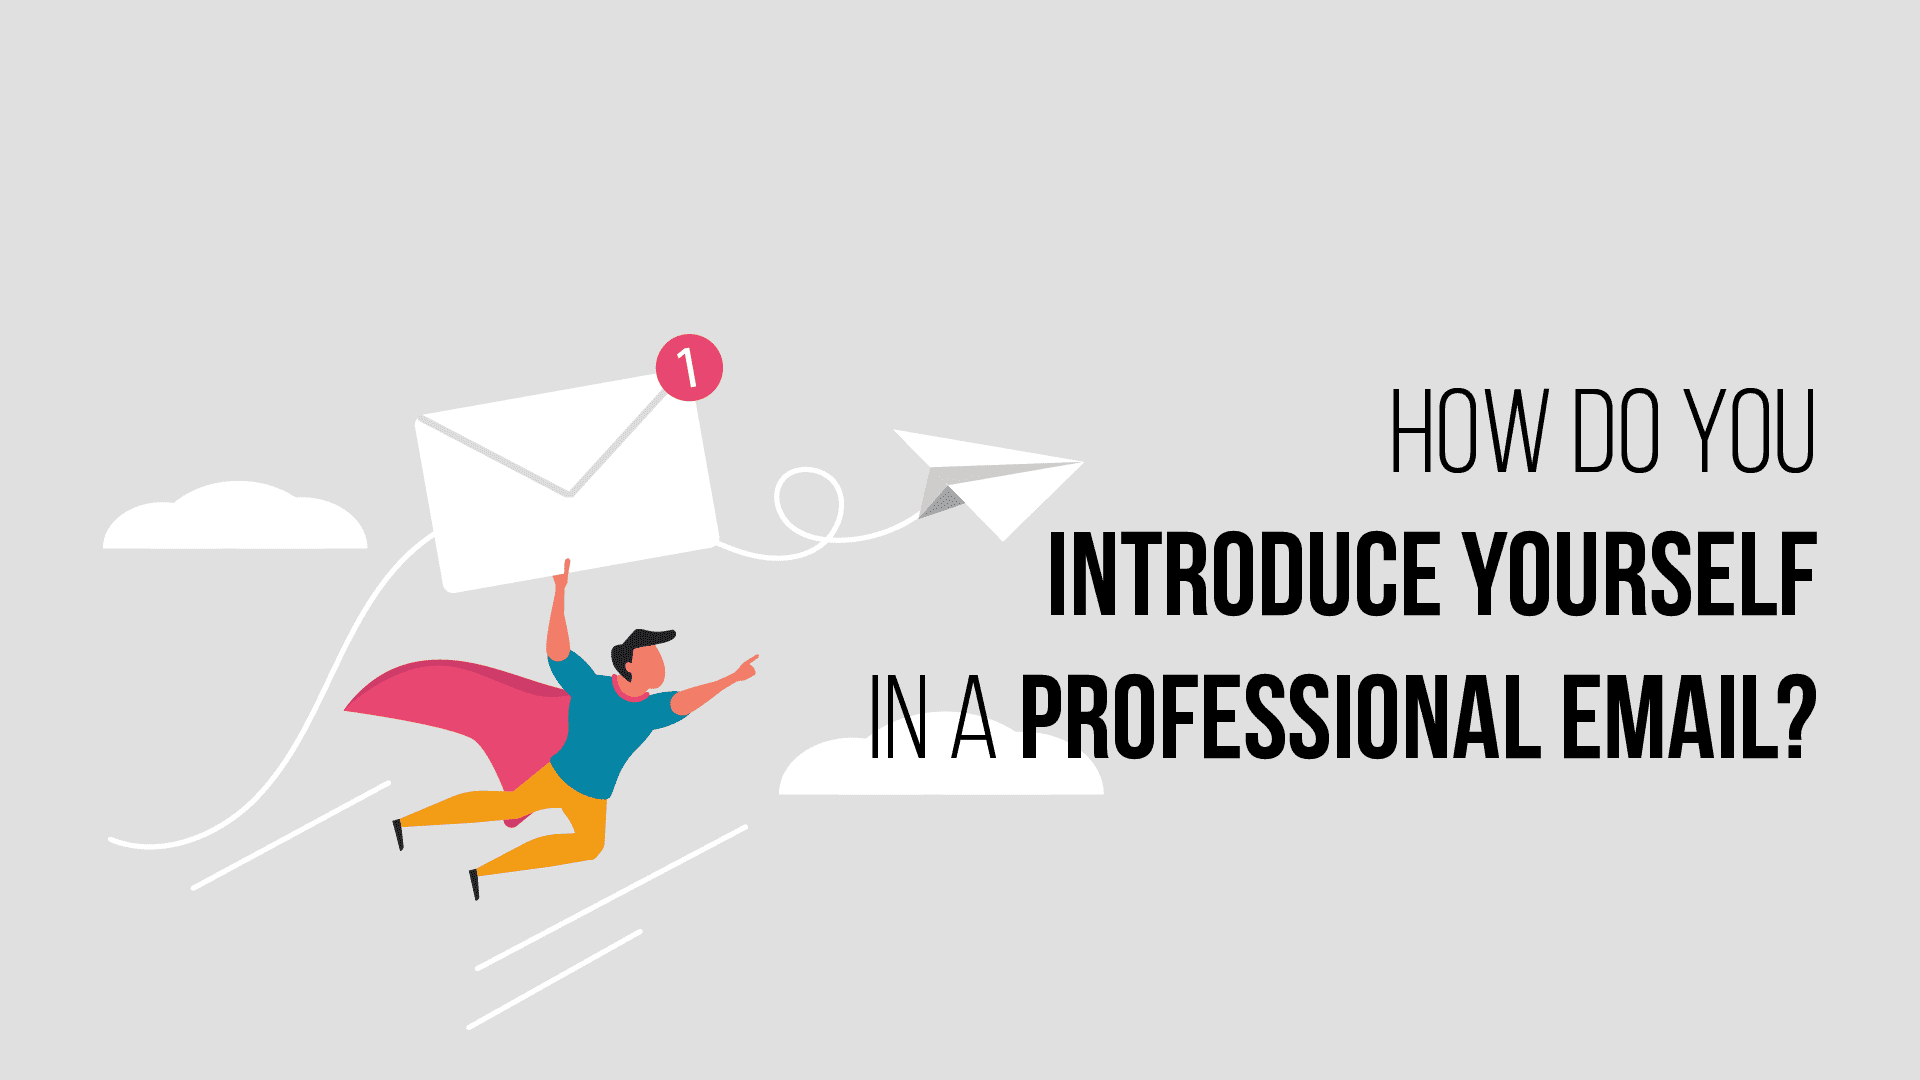 How Do You Introduce Yourself in a Professional Email?